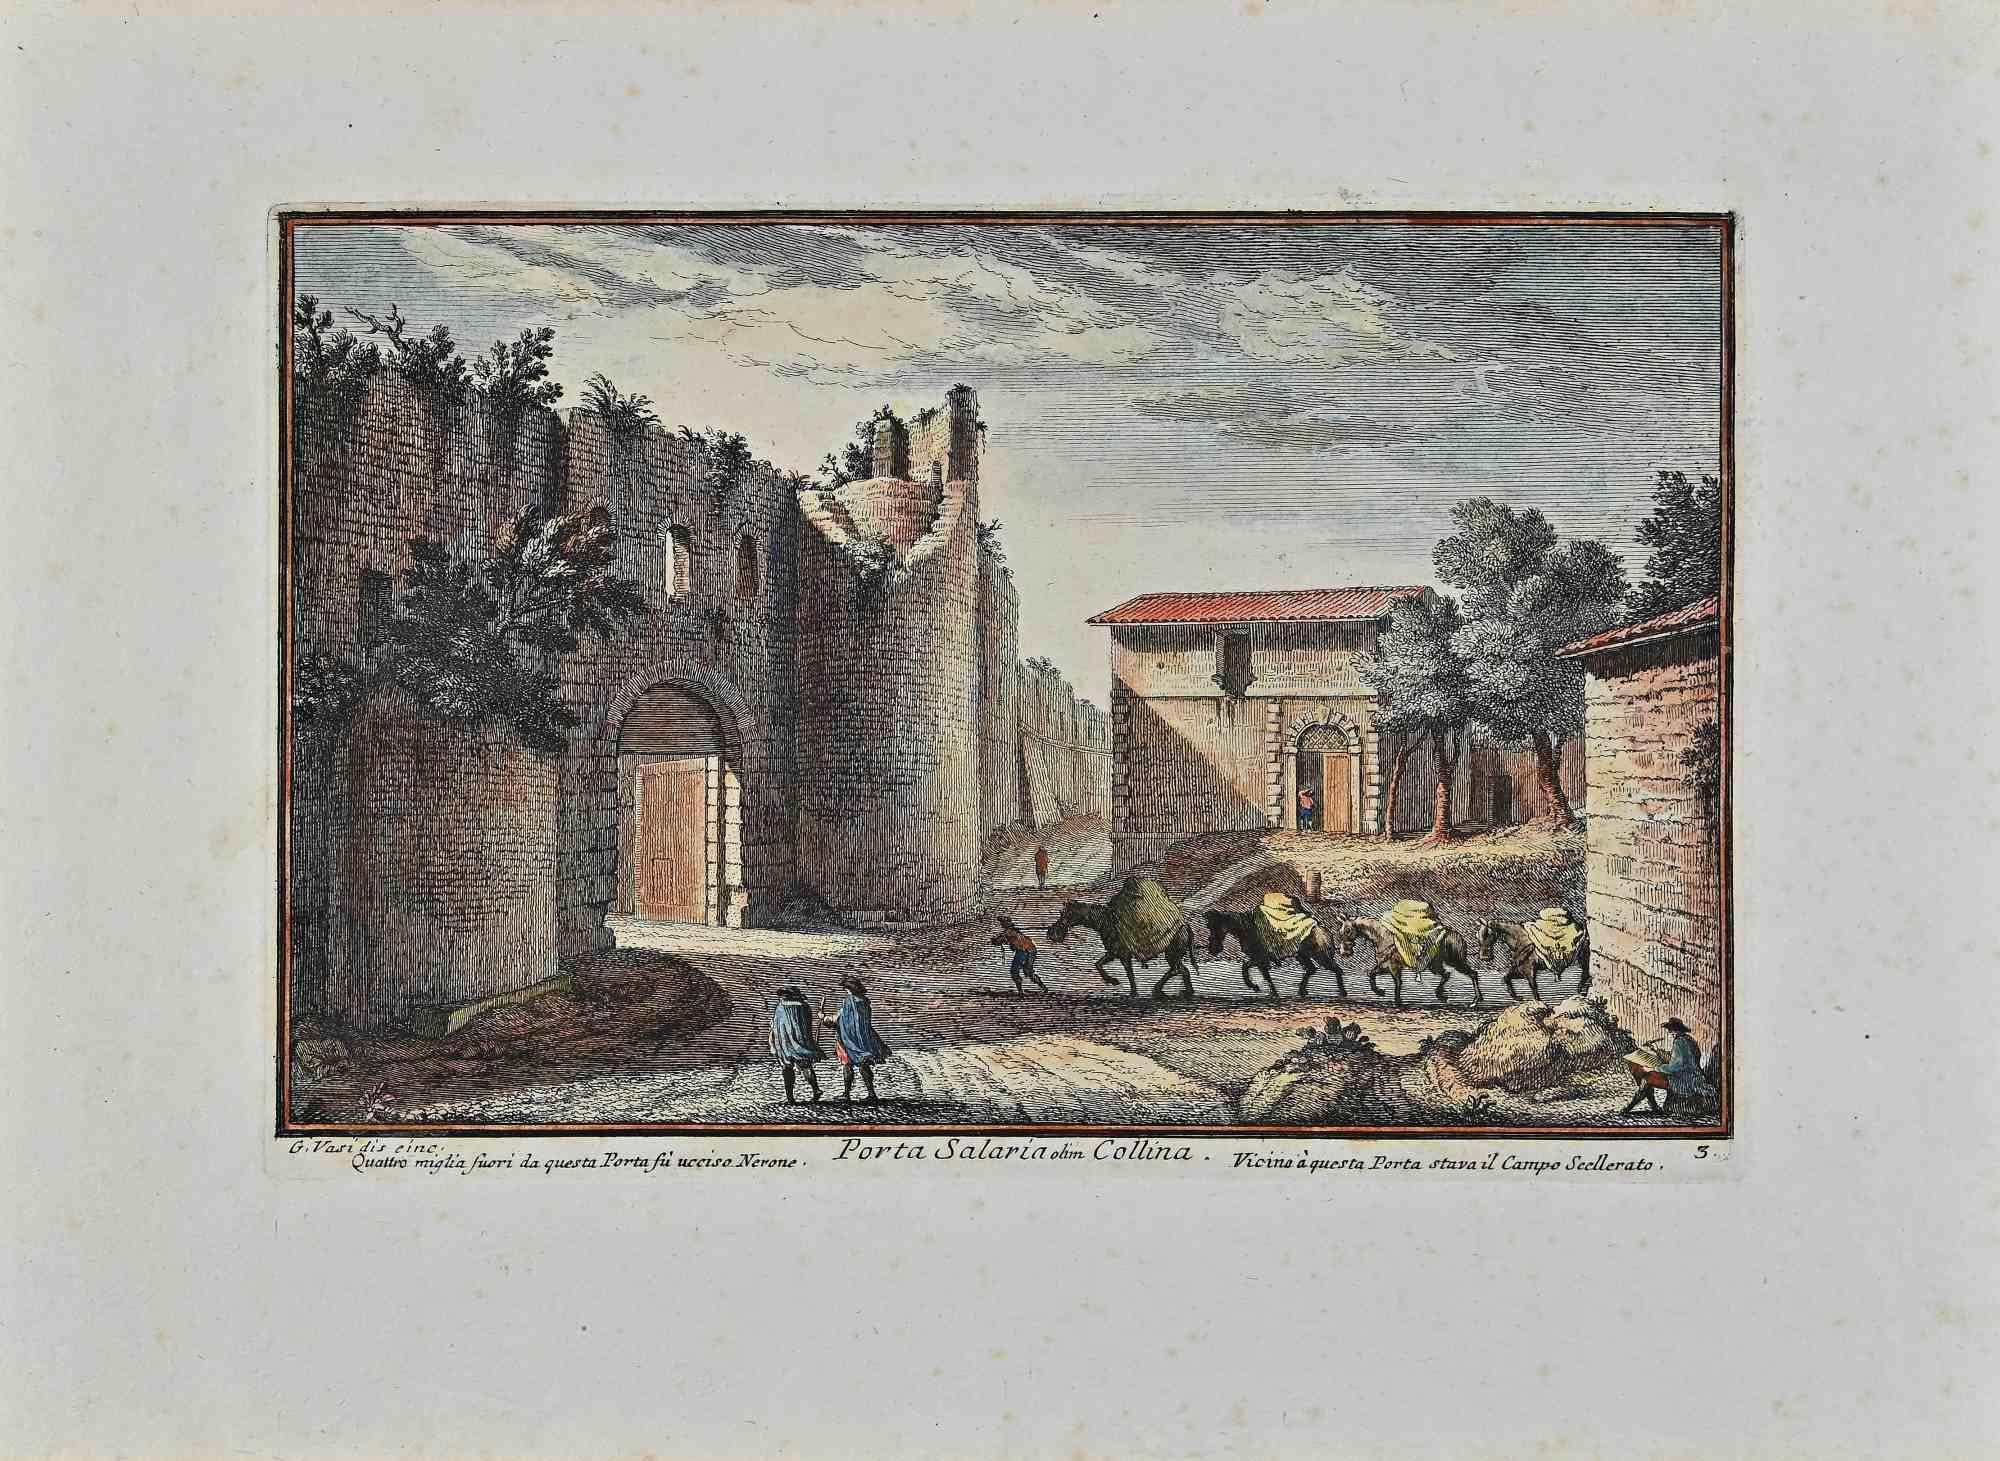 Porta Salaria is an original etching of the Late 18th century realized by Giuseppe Vasi.

Signed and titled on plate lower margin. 

Good conditions and aged margins with some foxings.

Giuseppe Vasi  (Corleone,1710 - Rome, 1782) was an engraver,